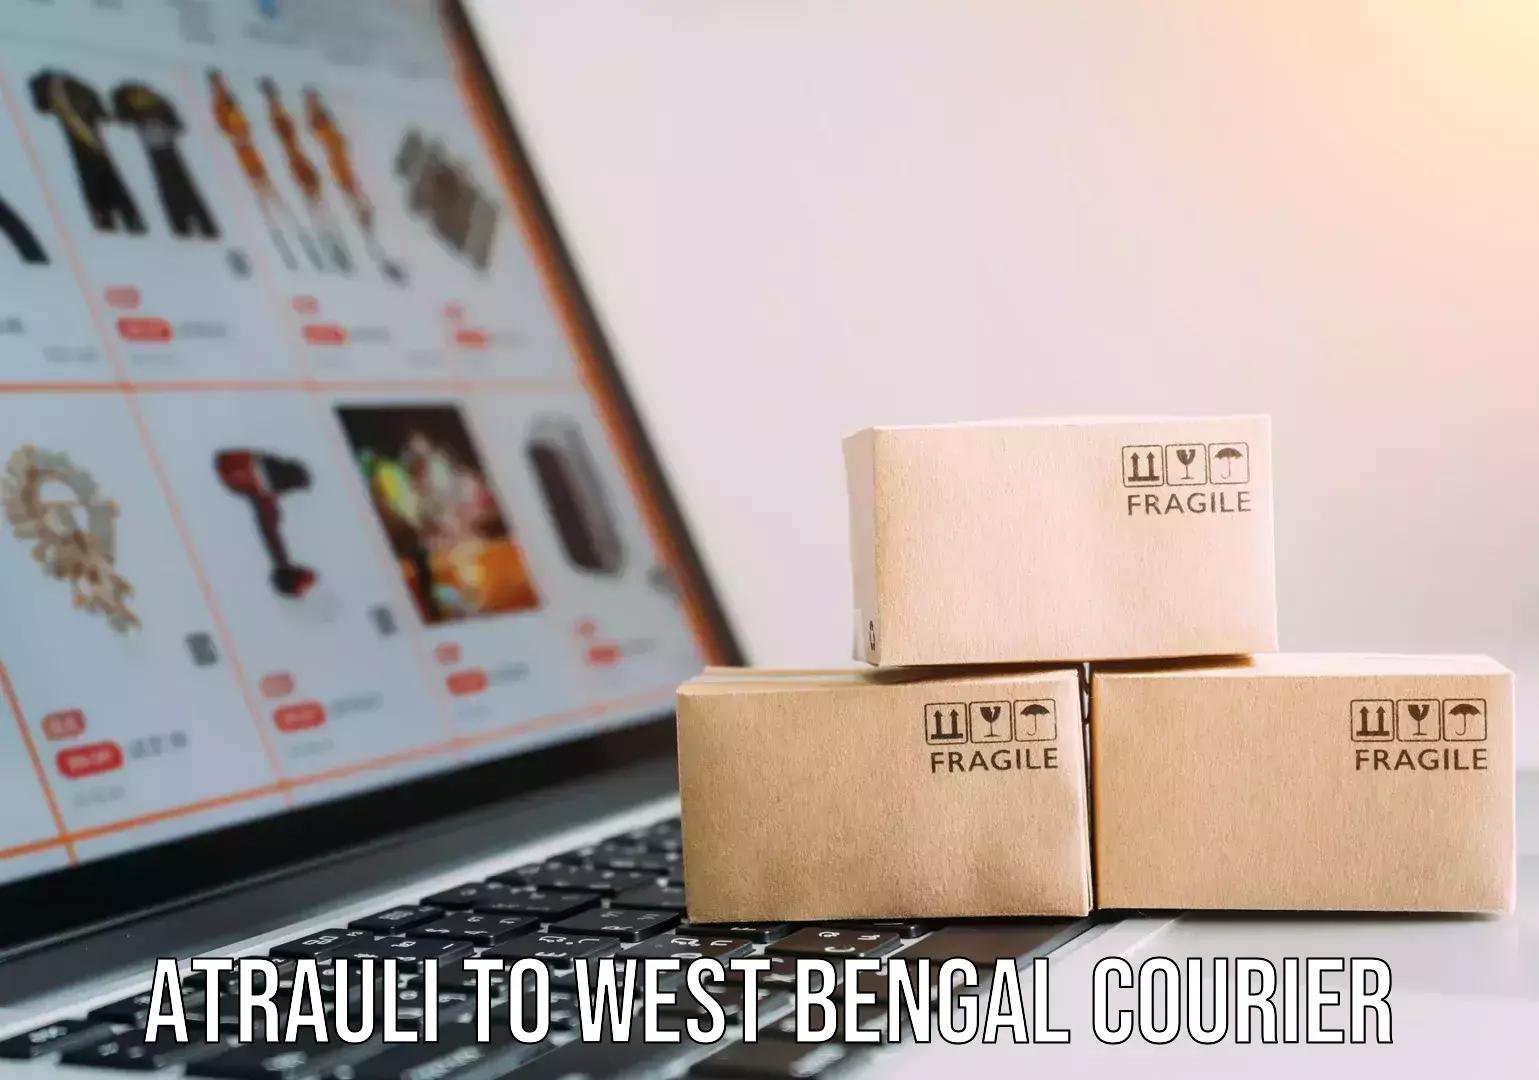 Customizable delivery plans Atrauli to West Bengal